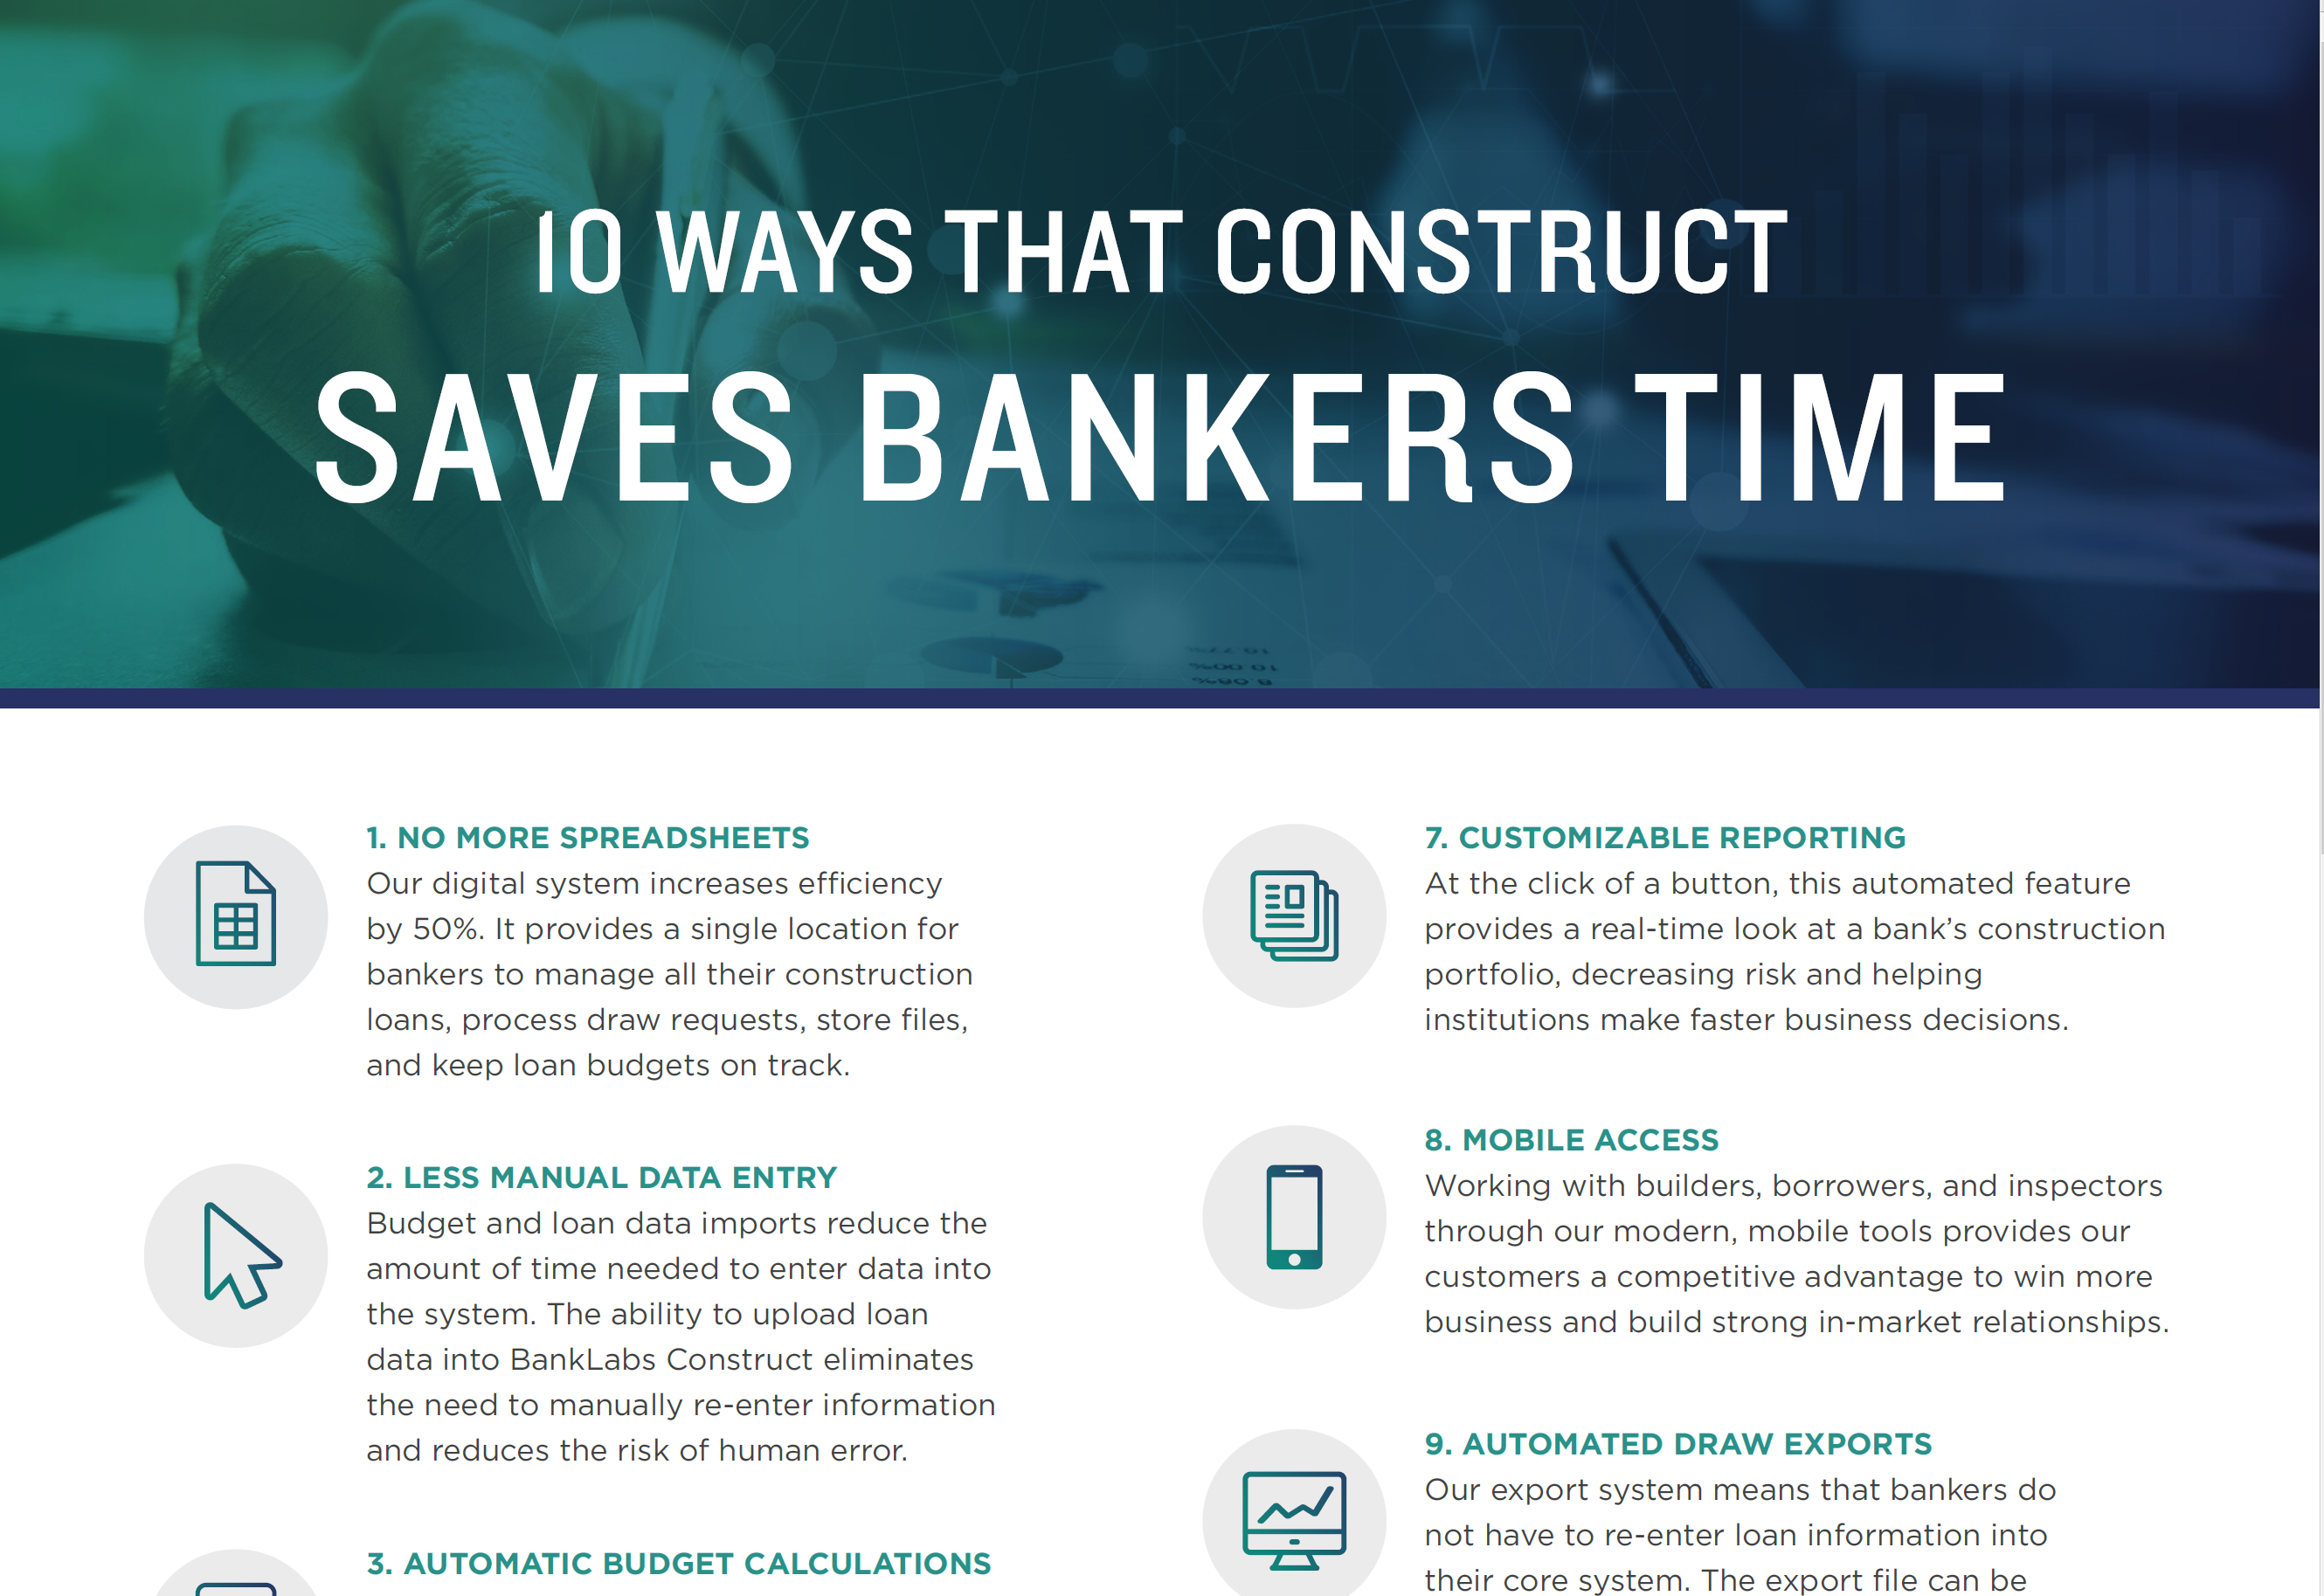 10 ways that construct save bankers time